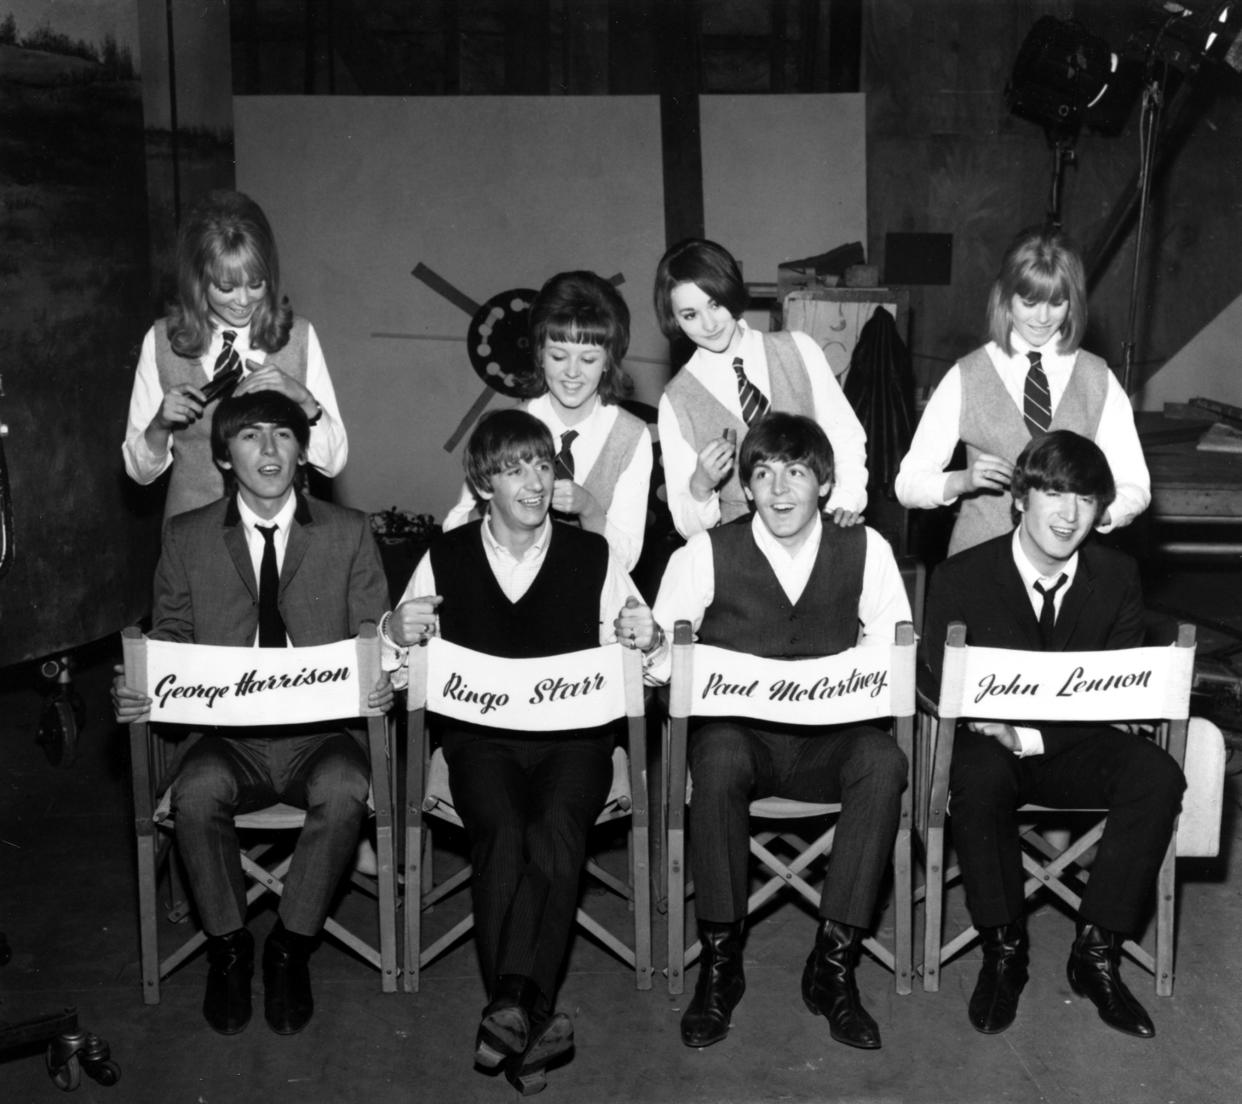 The Beatles, George Harrison, Ringo Starr, Paul McCartney and John Lennon, have their hair combed by stylists on the set of their first movie production, 